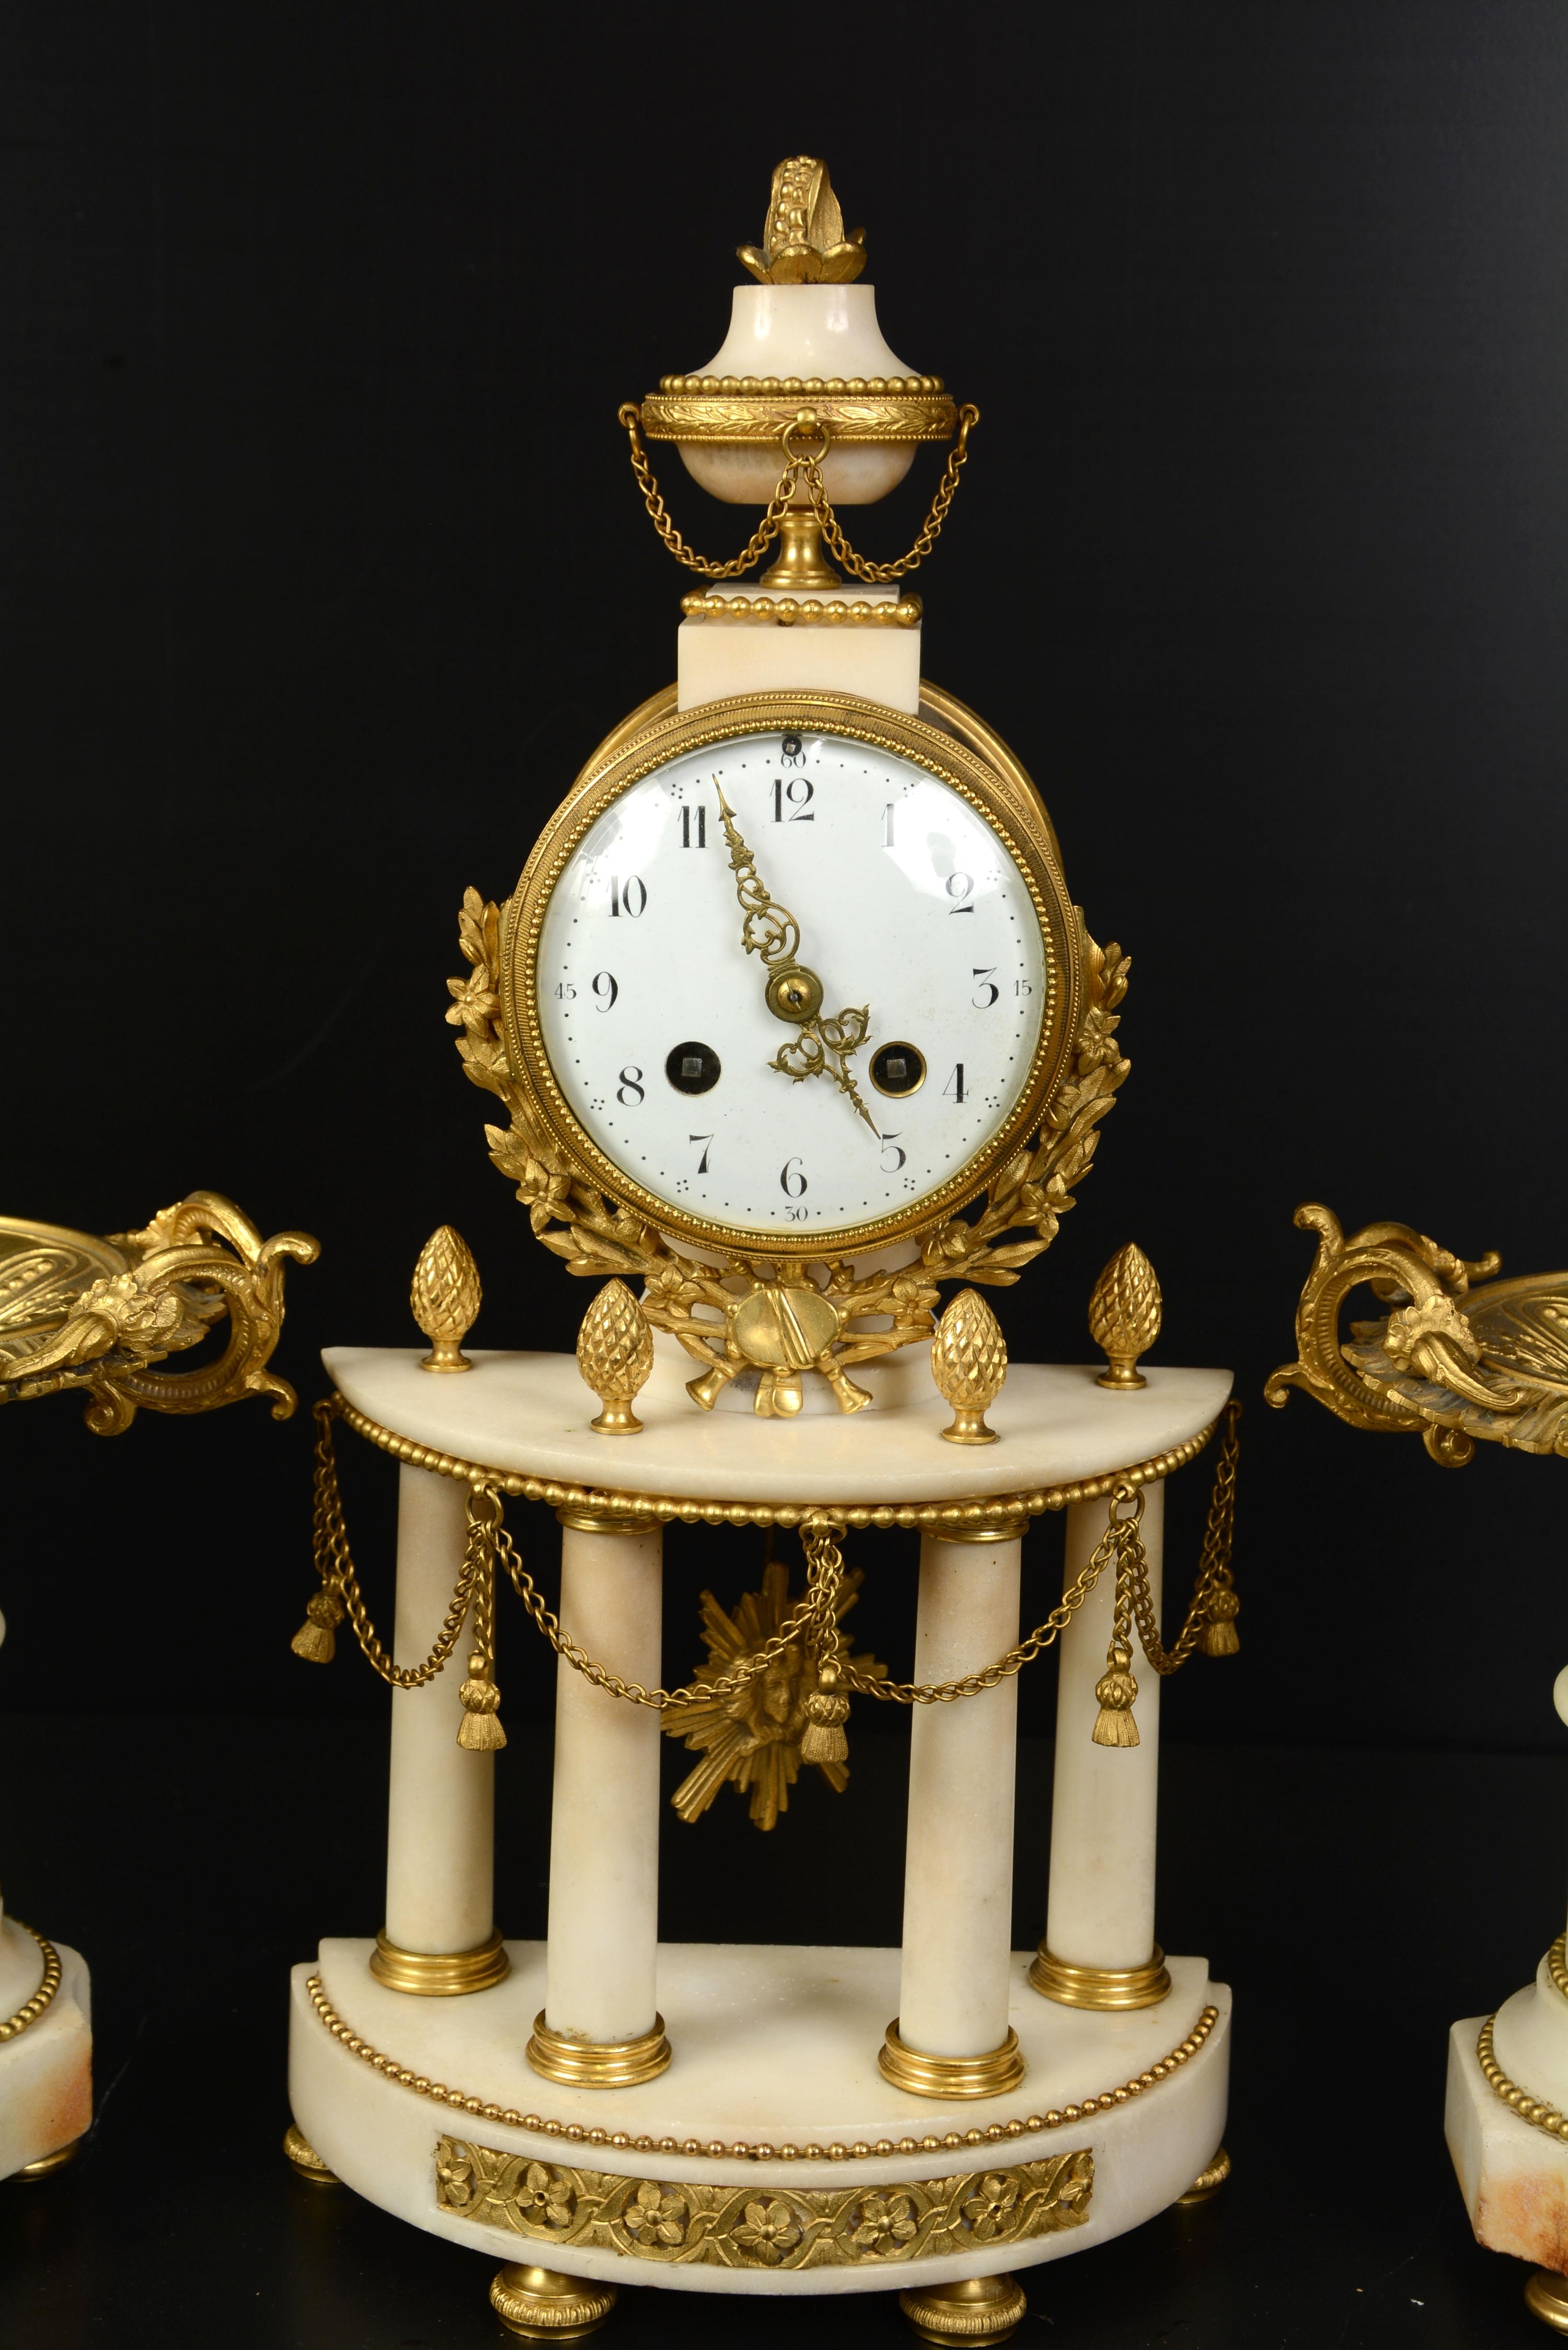 Two cups on pedestals and a clock.
The French style known as Louis XVI is characterized by its inspiration in classicism and covers approximately from 1760 to 1789. In the 19th century numerous artistic movements of the past were recovered, among